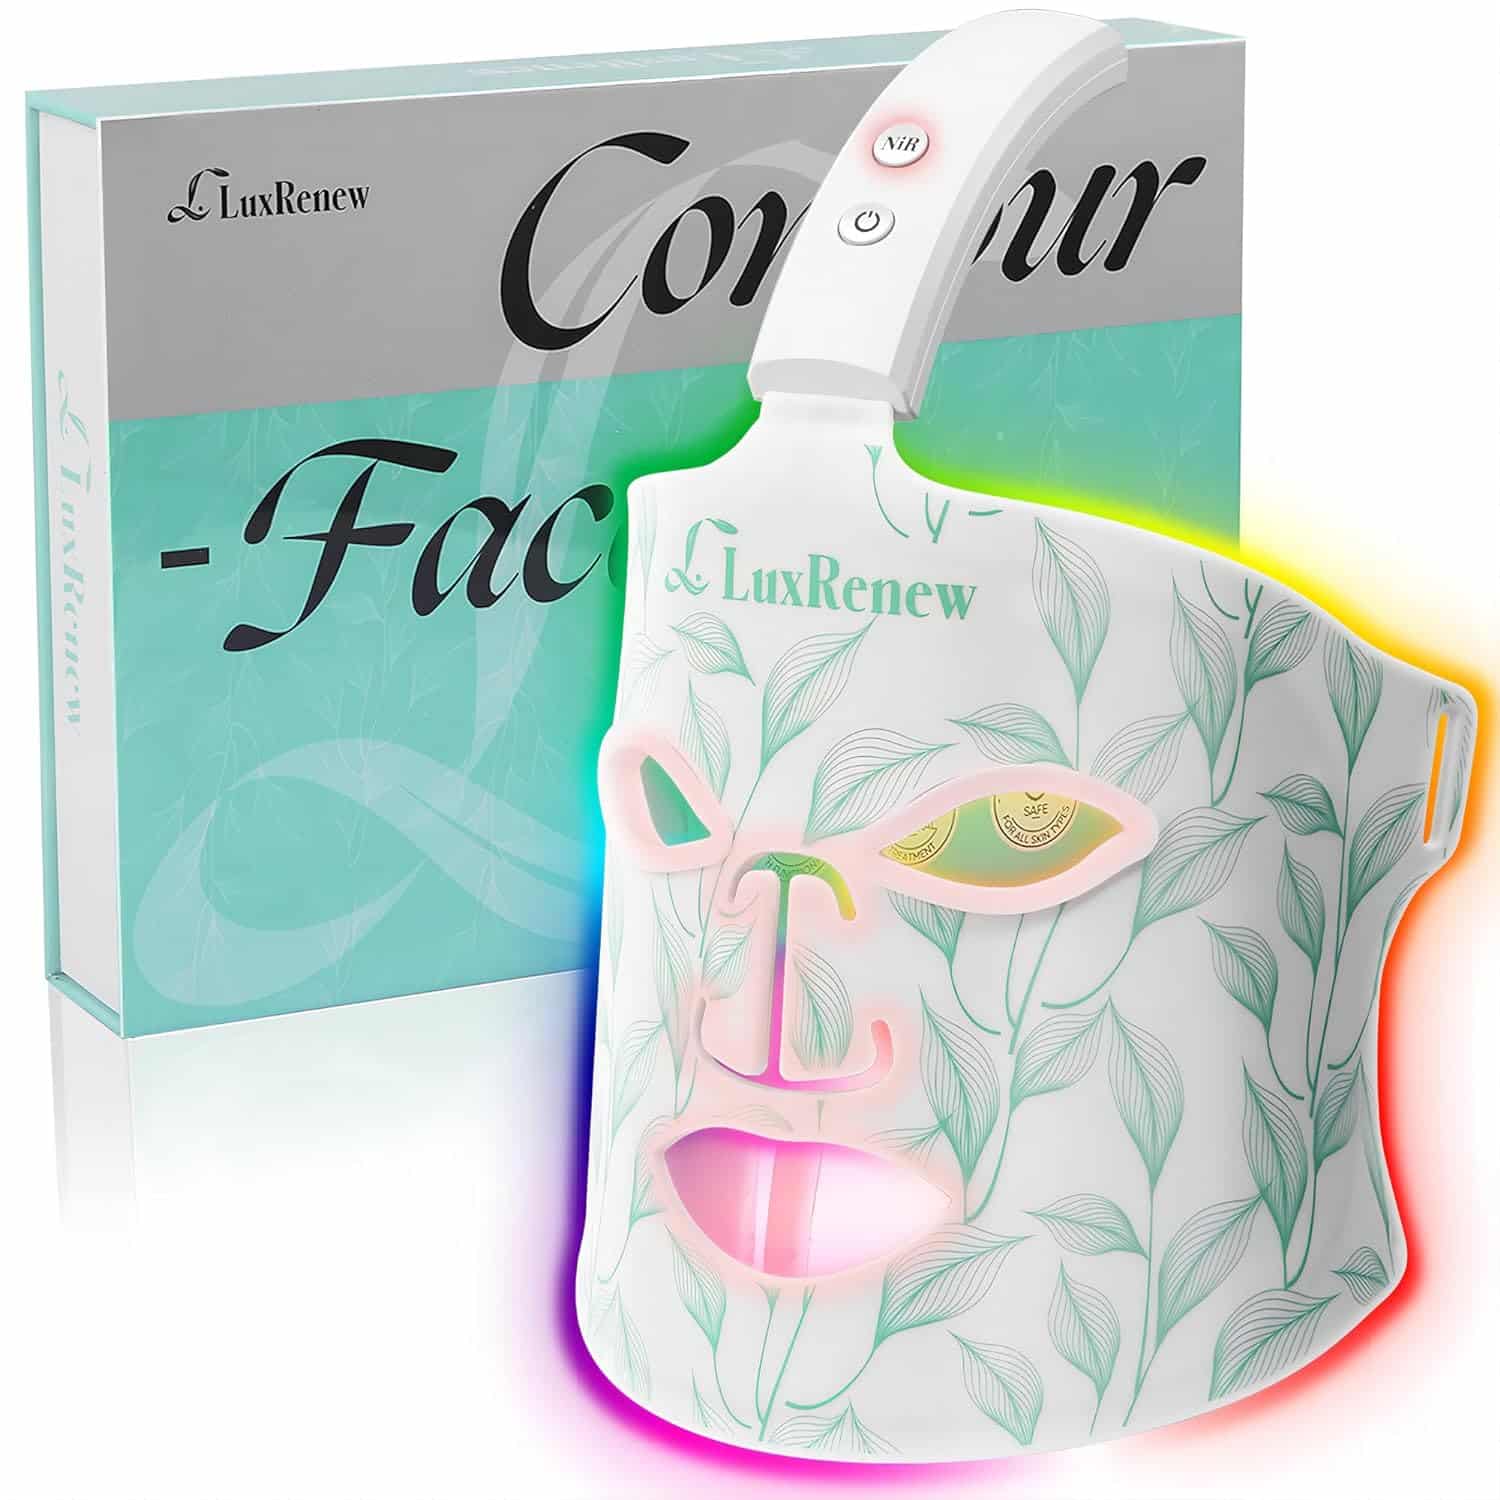 LuxRenew Red Light Therapy Mask, Near-infrared 850 Red Light + 7 Colors Led Face Mask Light Therapy, Portable and Rechargeable for Facial Led Mask Skincare at Home and Travel [LMask Pro]